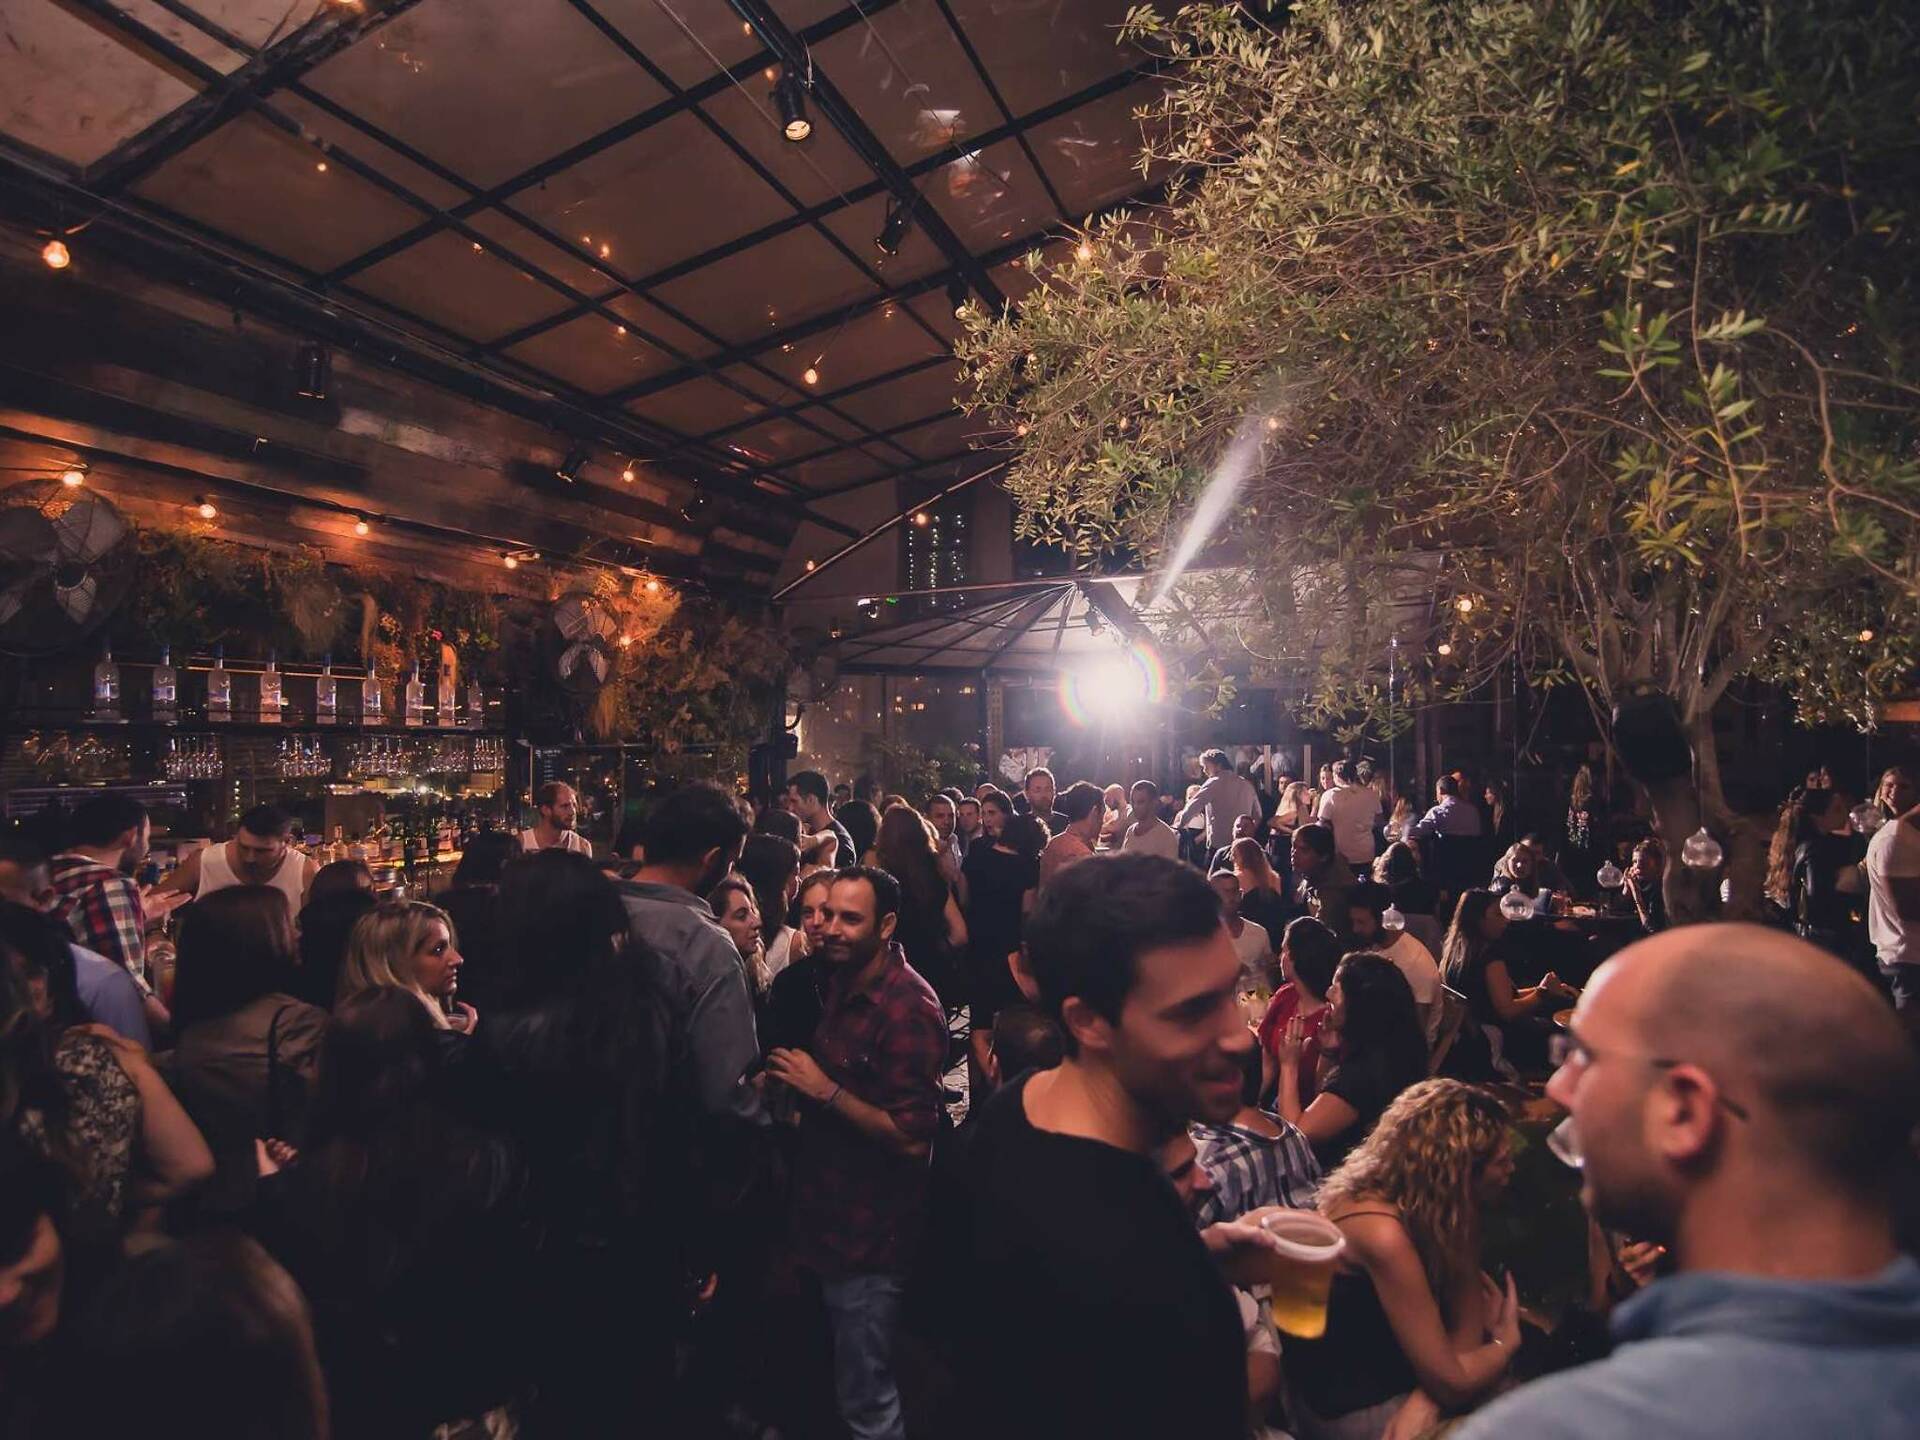 Tel Aviv nightlife's best pick up bars and clubs